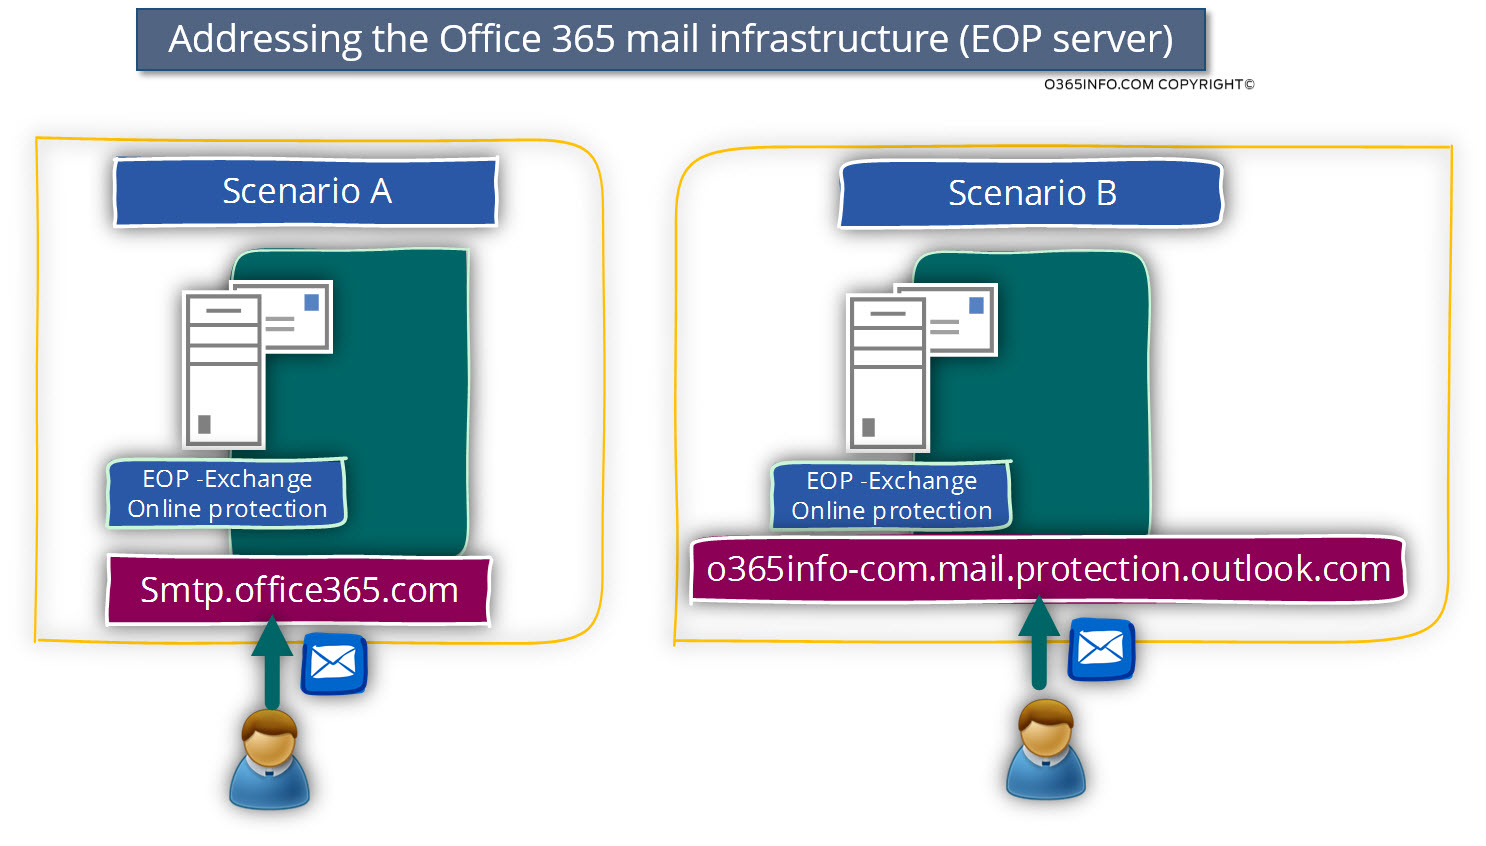 Addressing the Office 365 mail infrastructure - EOP server